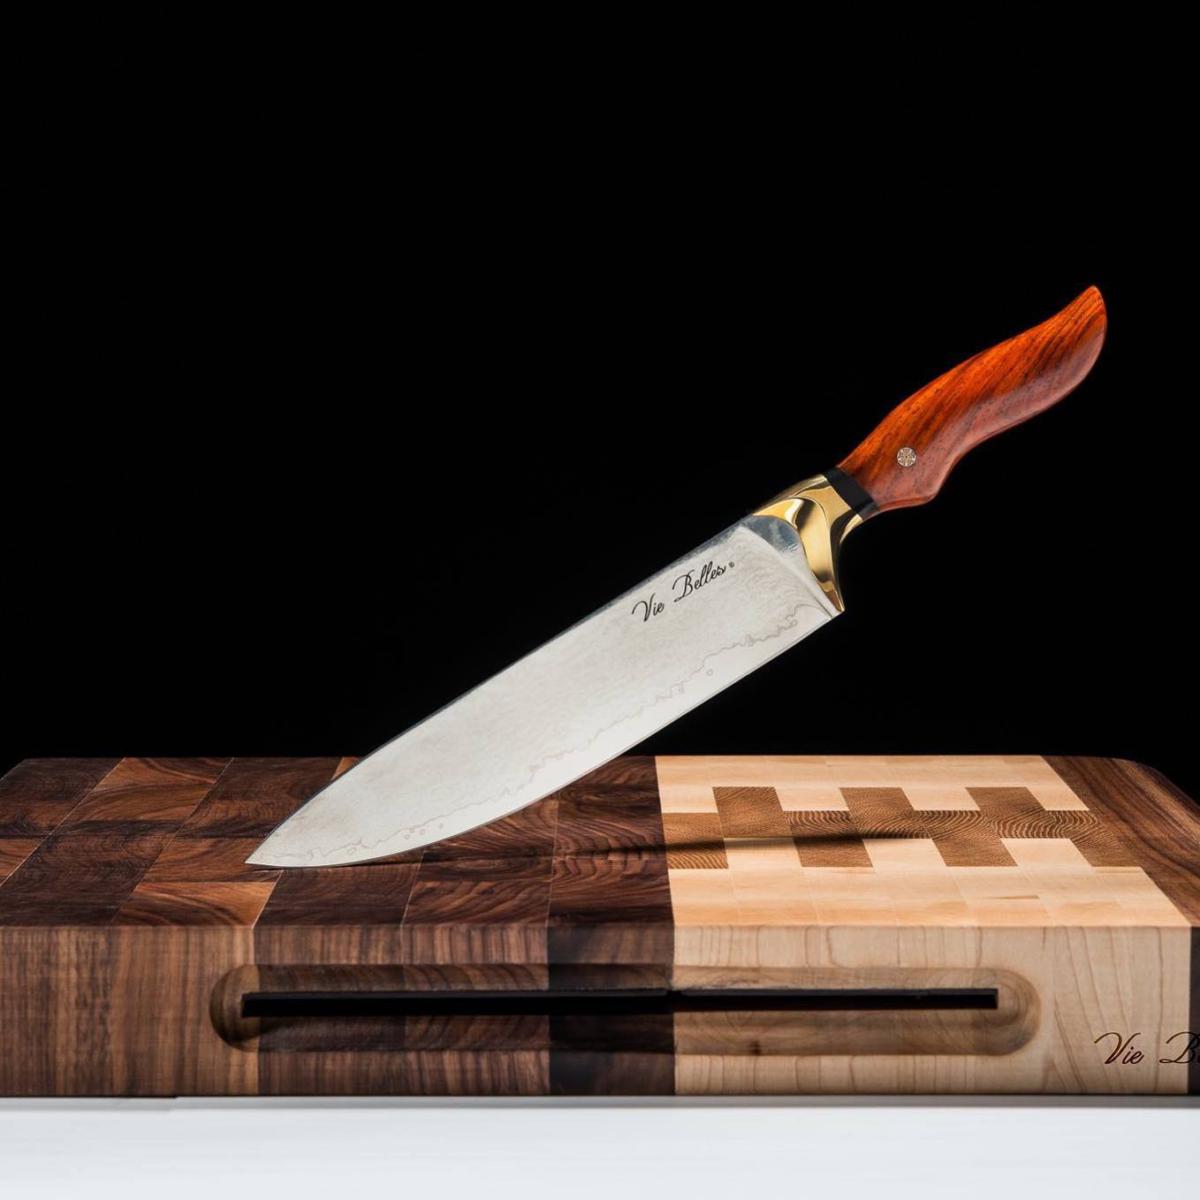 The Advantages Of A Quality Kitchen Knife